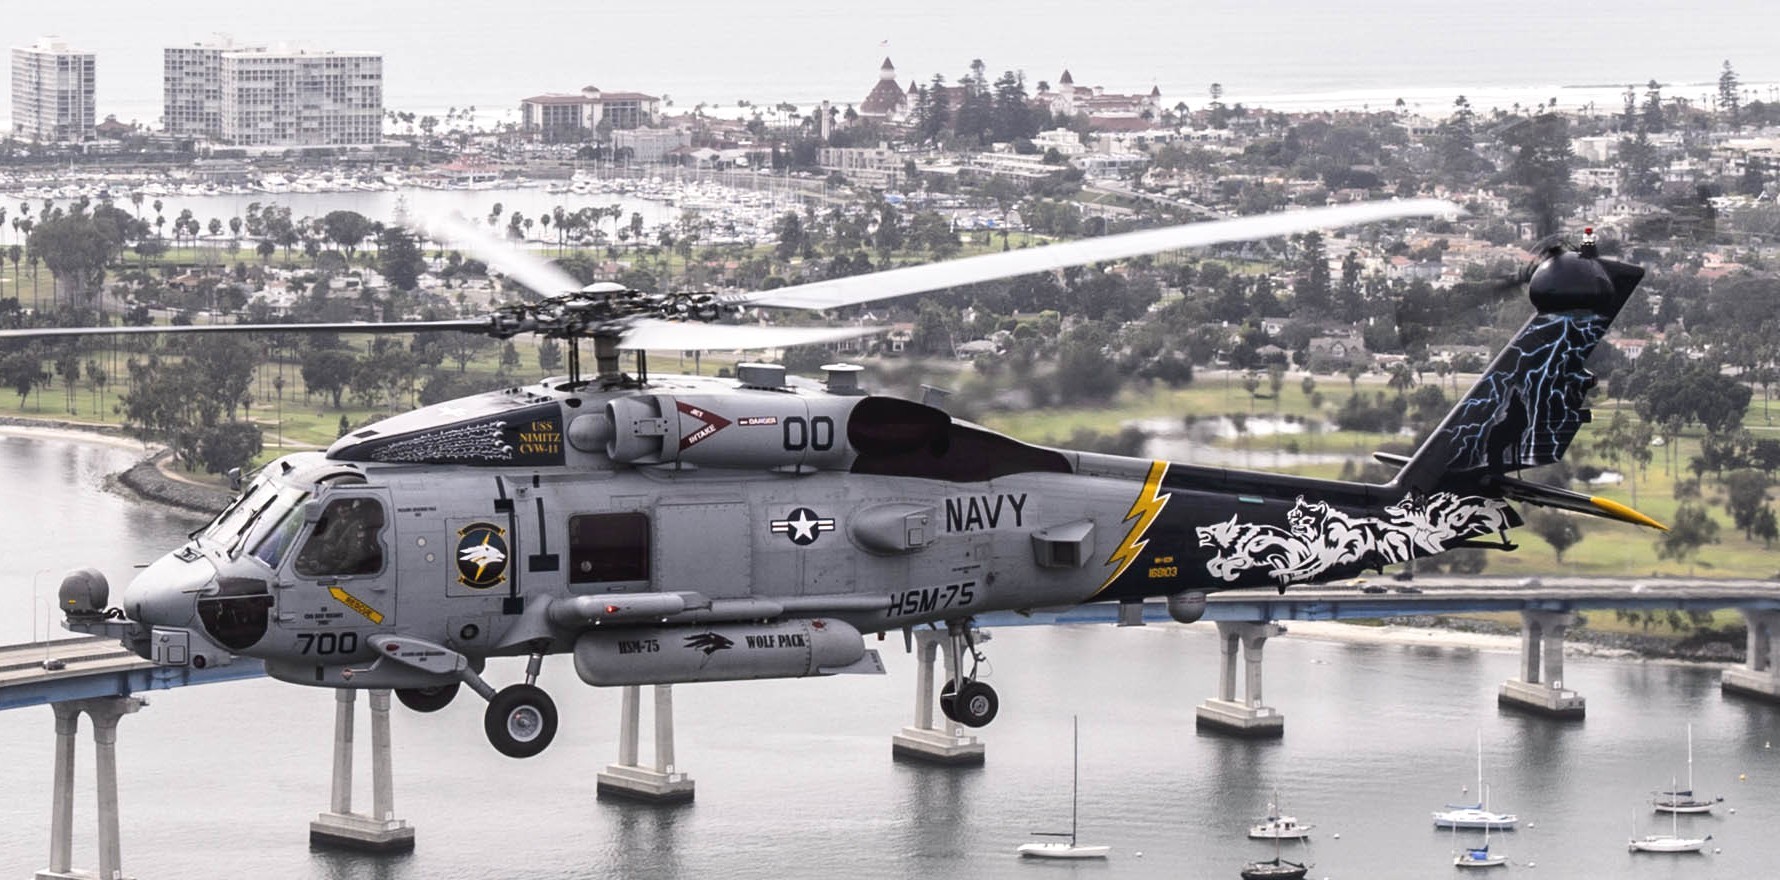 hsm-75 wolfpack helicopter maritime strike squadron us navy mh-60r seahawk 2016 40